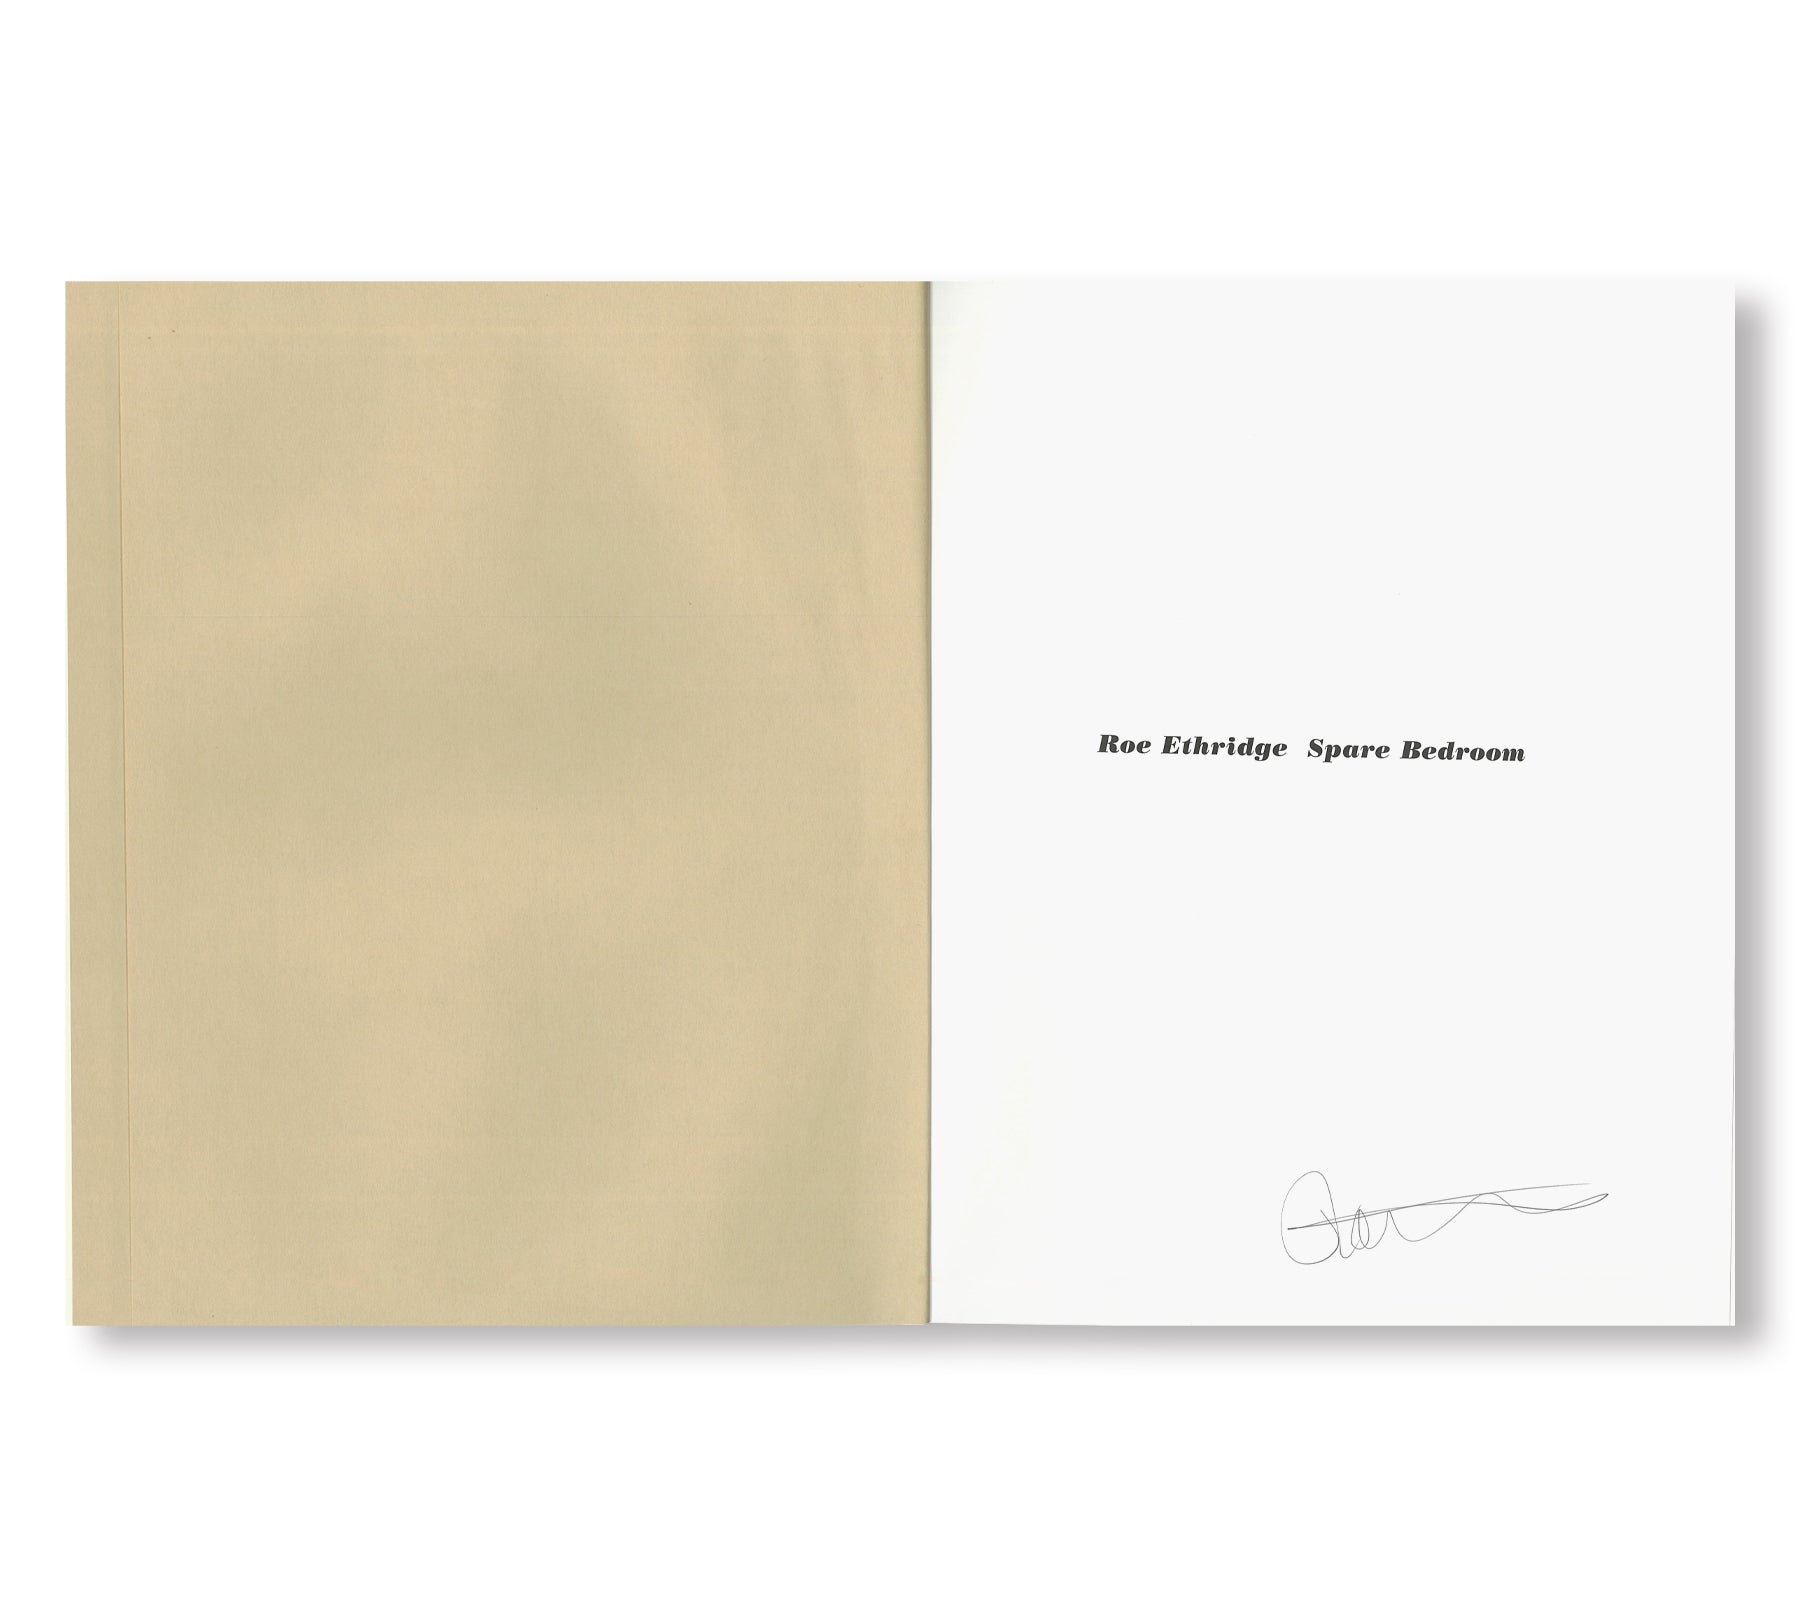 SPARE BEDROOM by Roe Ethridge [SIGNED]